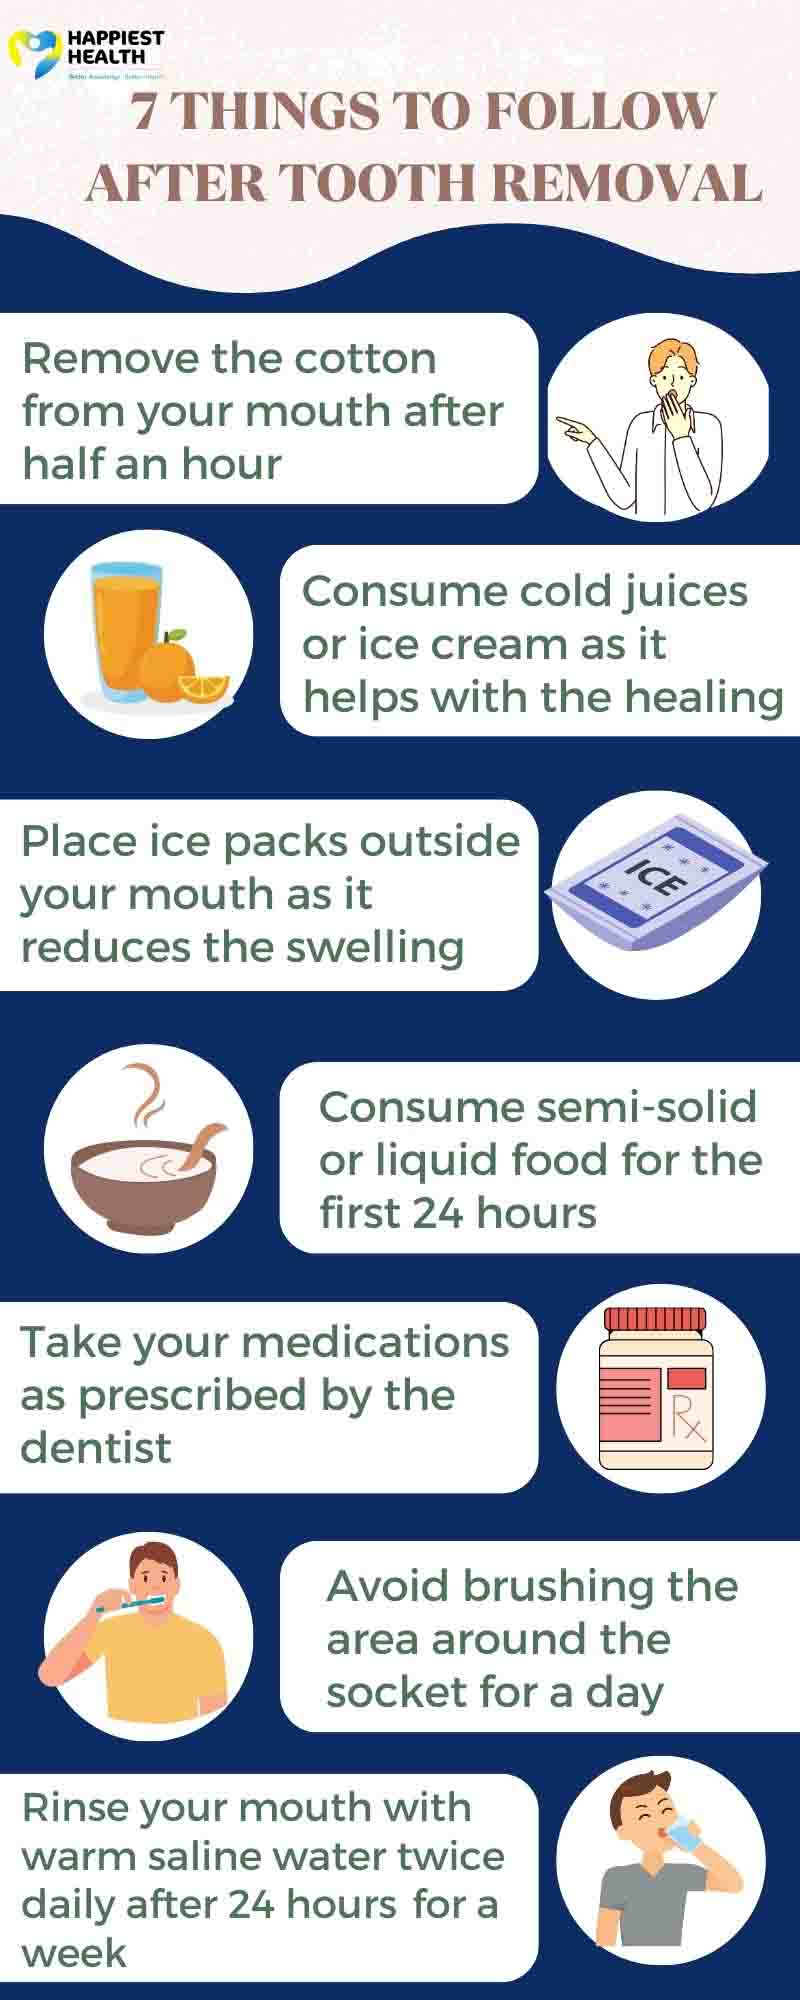 7 things to follow after tooth removal